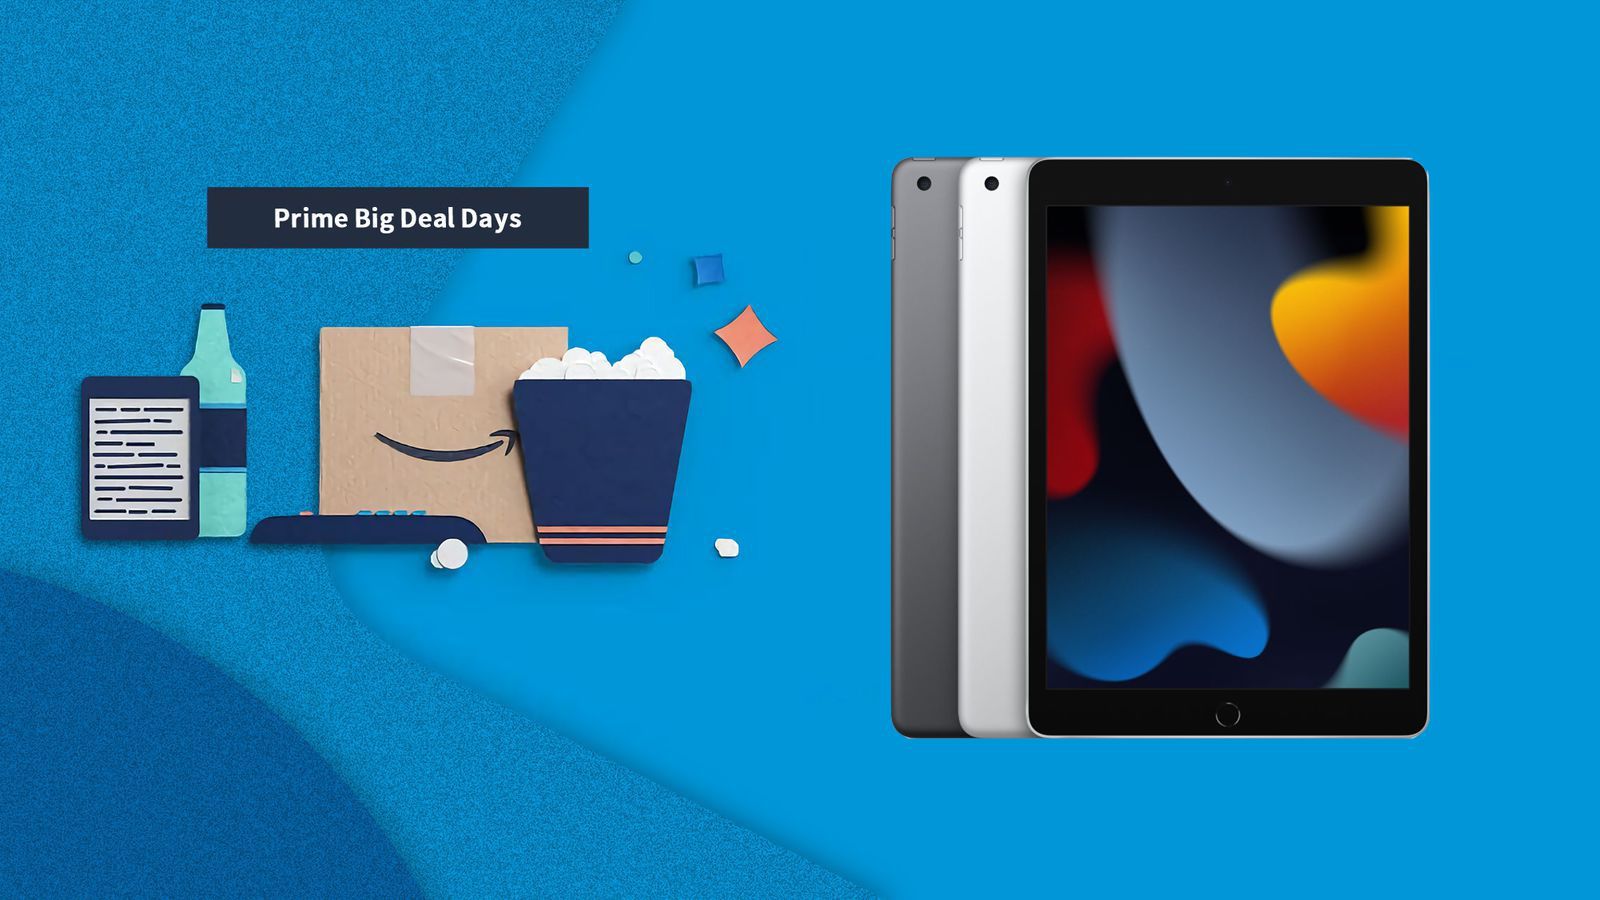 Amazon Prime Big Deal Days 10.2Inch iPad Drops to 249 AllTime Low